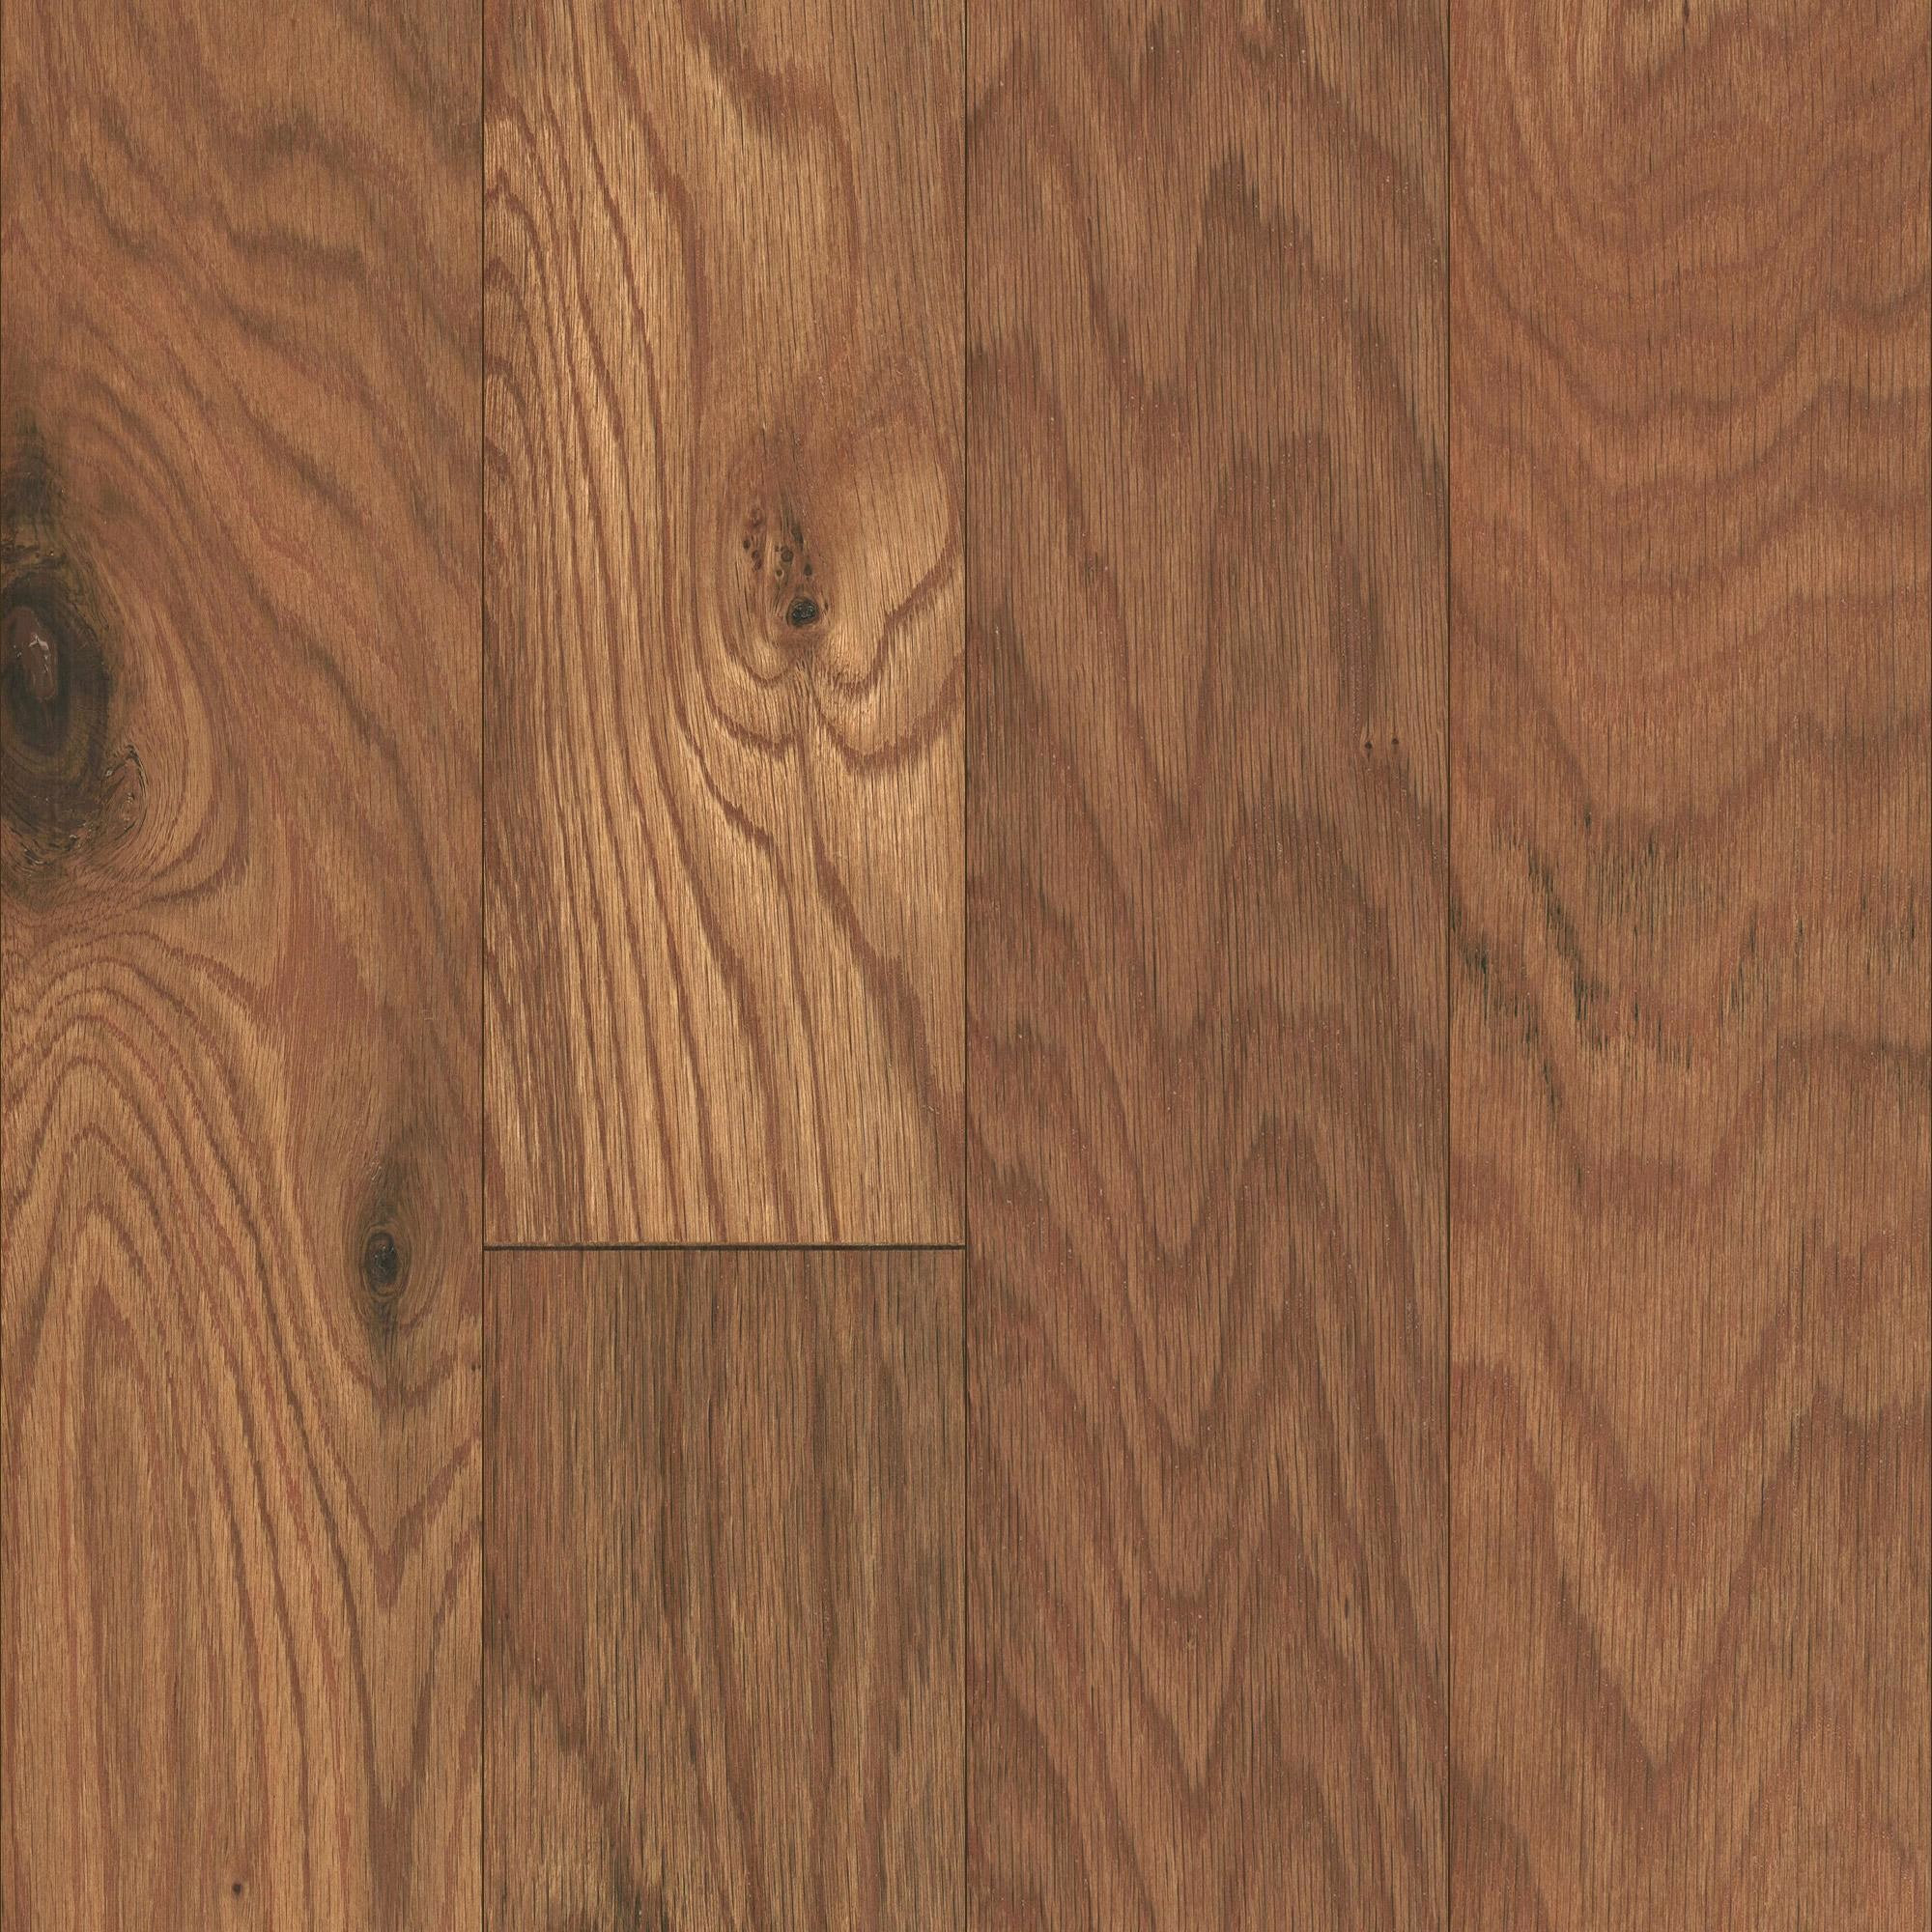 22 Stunning How to Finish An Unfinished Hardwood Floor 2024 free download how to finish an unfinished hardwood floor of 16 fresh hardwood floor polish photos dizpos com with 50 fresh engineered hardwood flooring cost 50 s